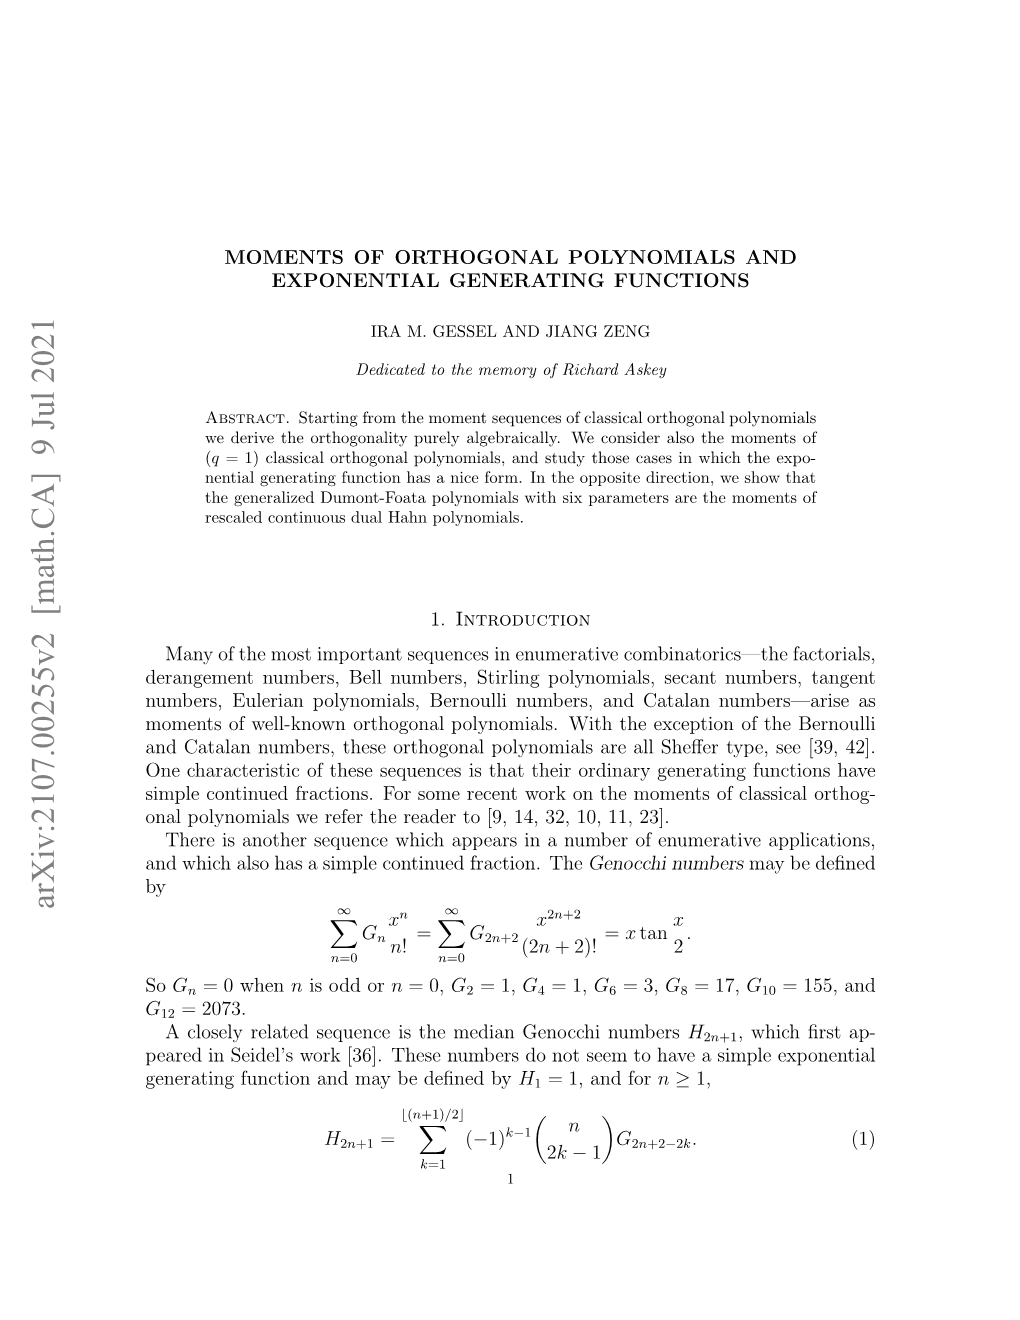 Moments of Orthogonal Polynomials and Exponential Generating